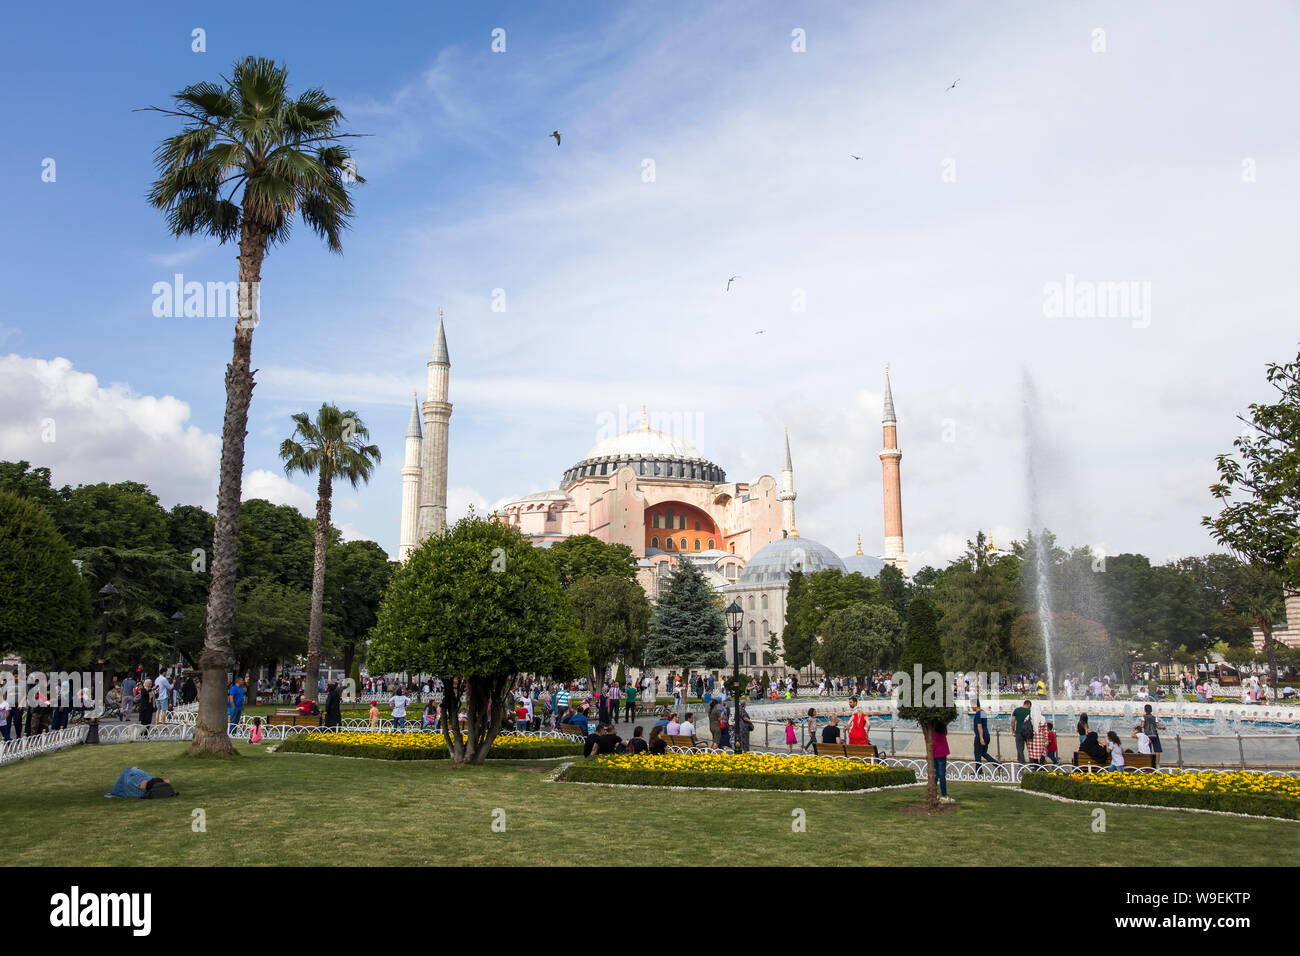 ISTANBUL, TURKEY - JUNE 15, 2019: Unidentified people in front of Hagia Sophia in Istanbul, Turkey. For almost 500 years, Hagia Sophia served as a mod Stock Photo